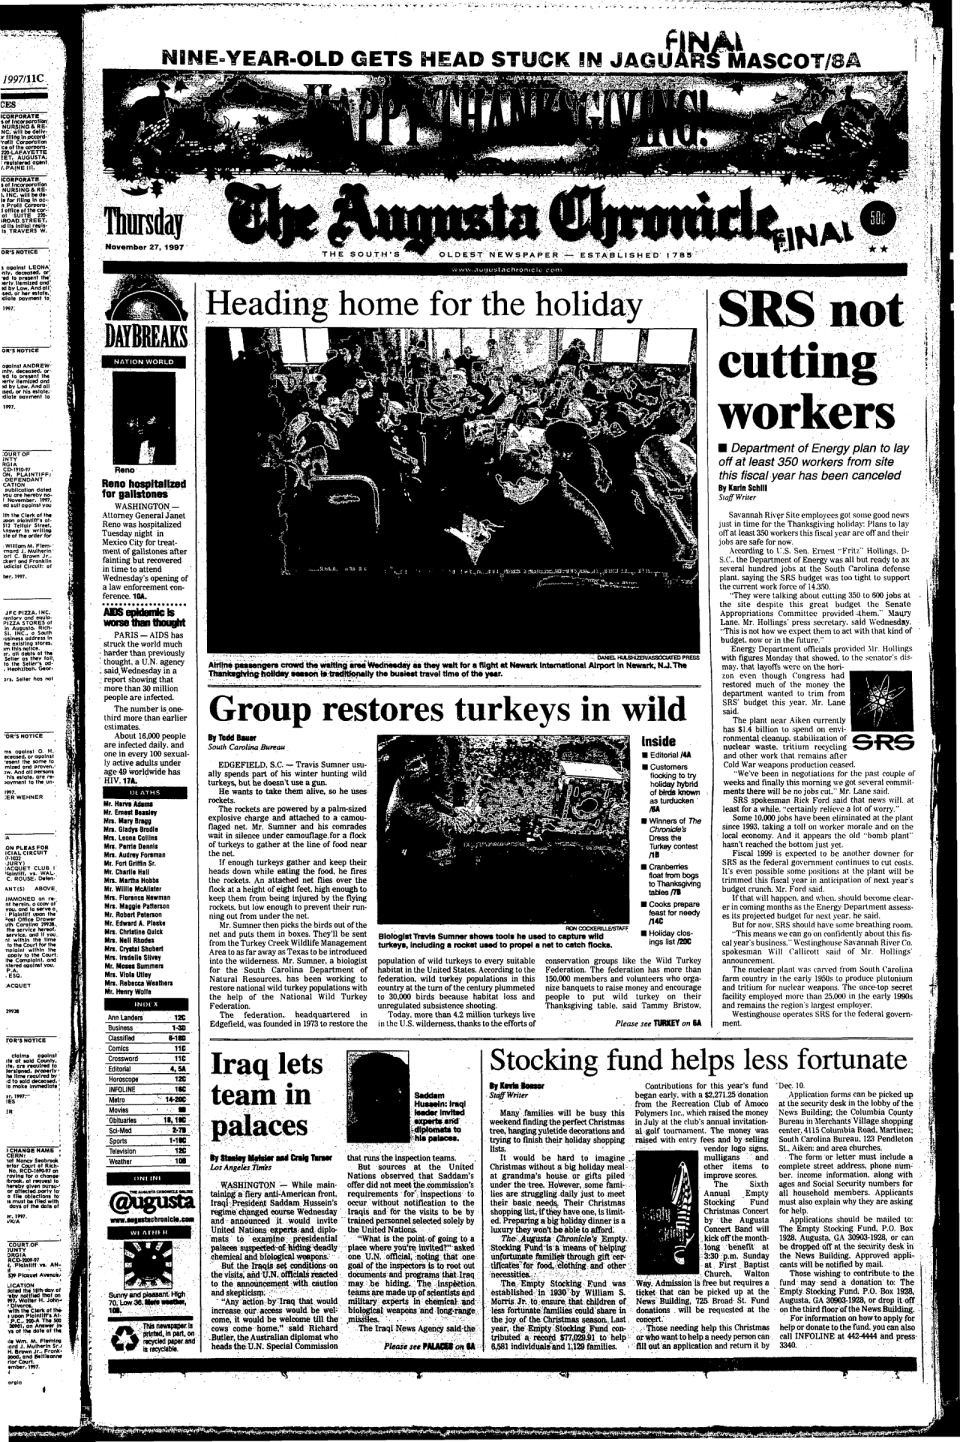 The front page of the Augusta Chronicle on Thanksgiving on November 27, 1997.